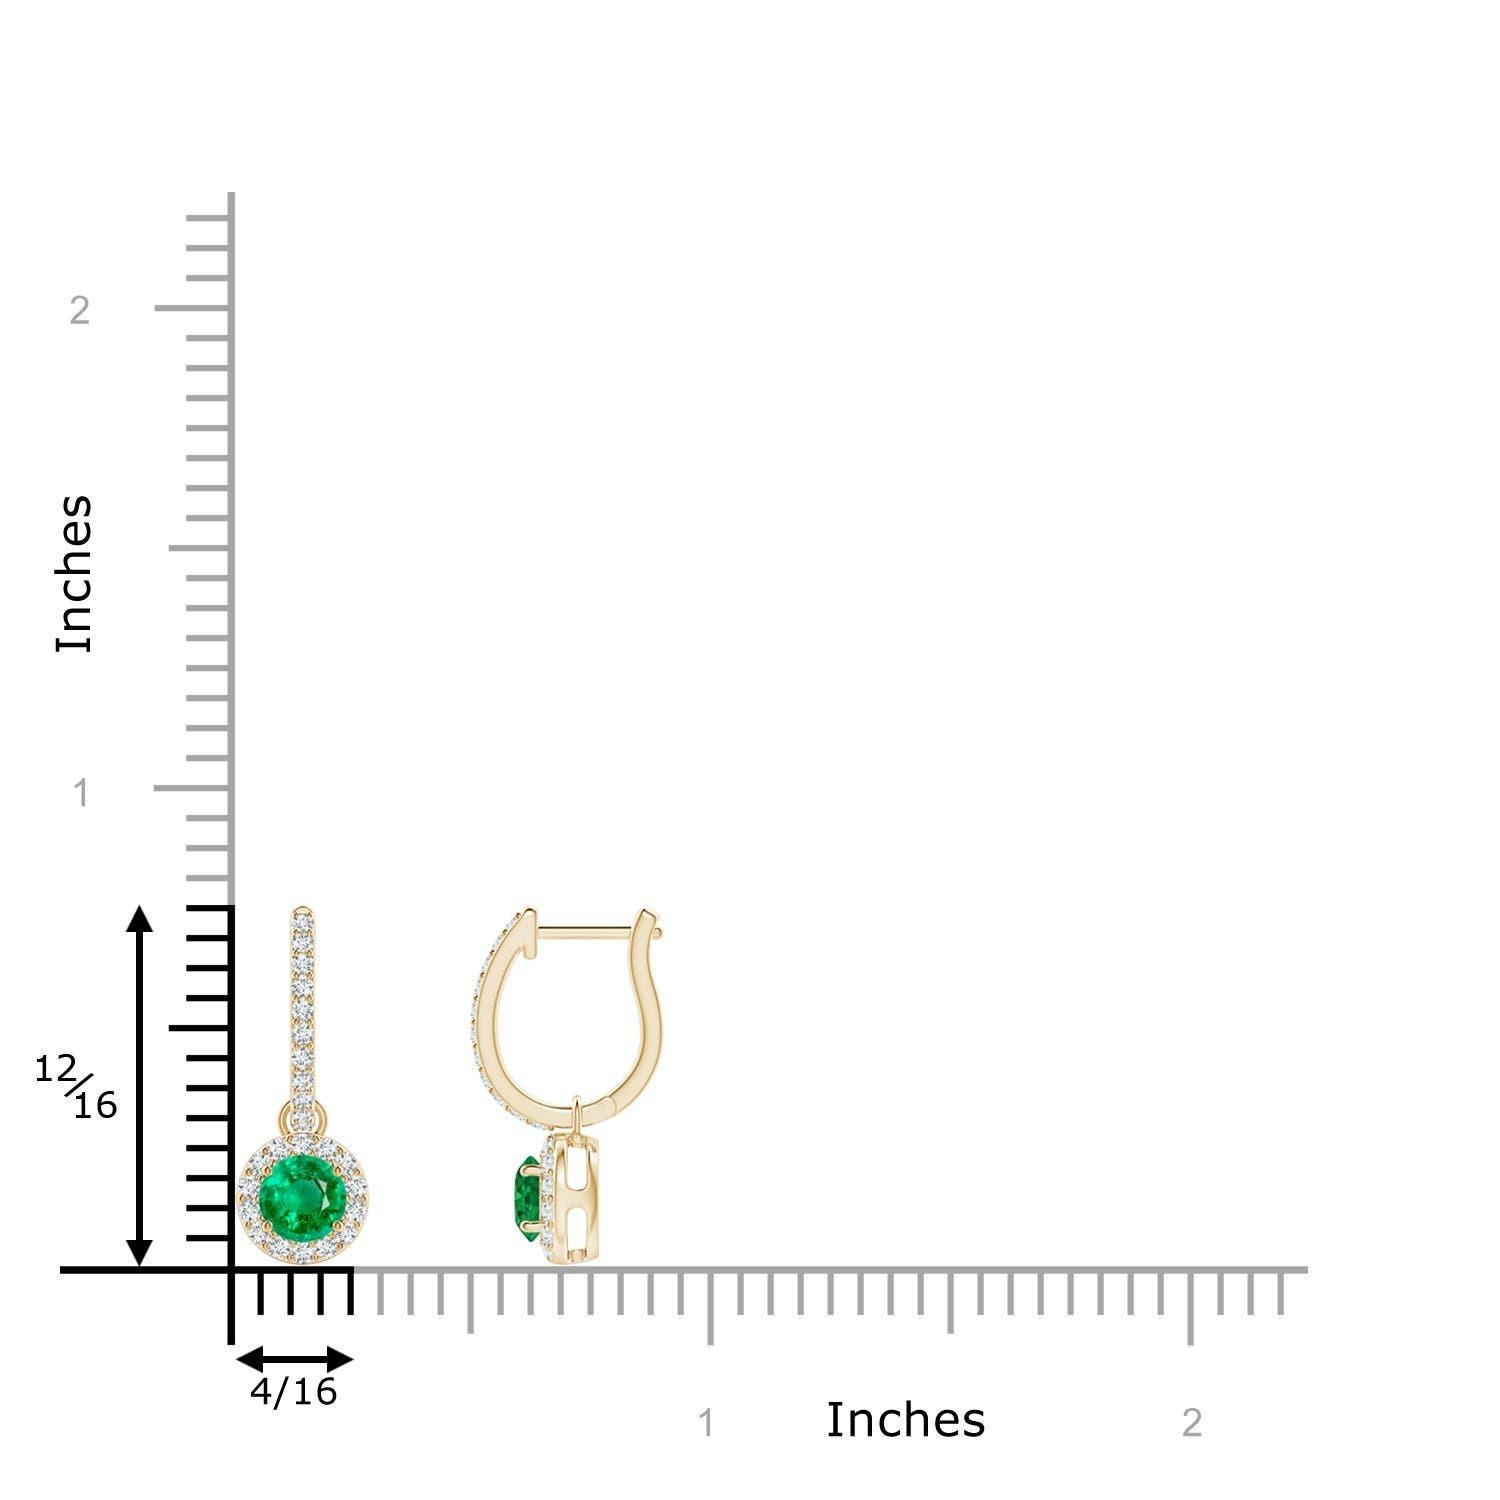 Nestled within a glimmering halo of round diamonds are round lush green emeralds in prong settings. The diamond accents on the hoop lend an additional touch of elegance to these emerald dangle earrings crafted in 14k yellow gold.
Emerald is the